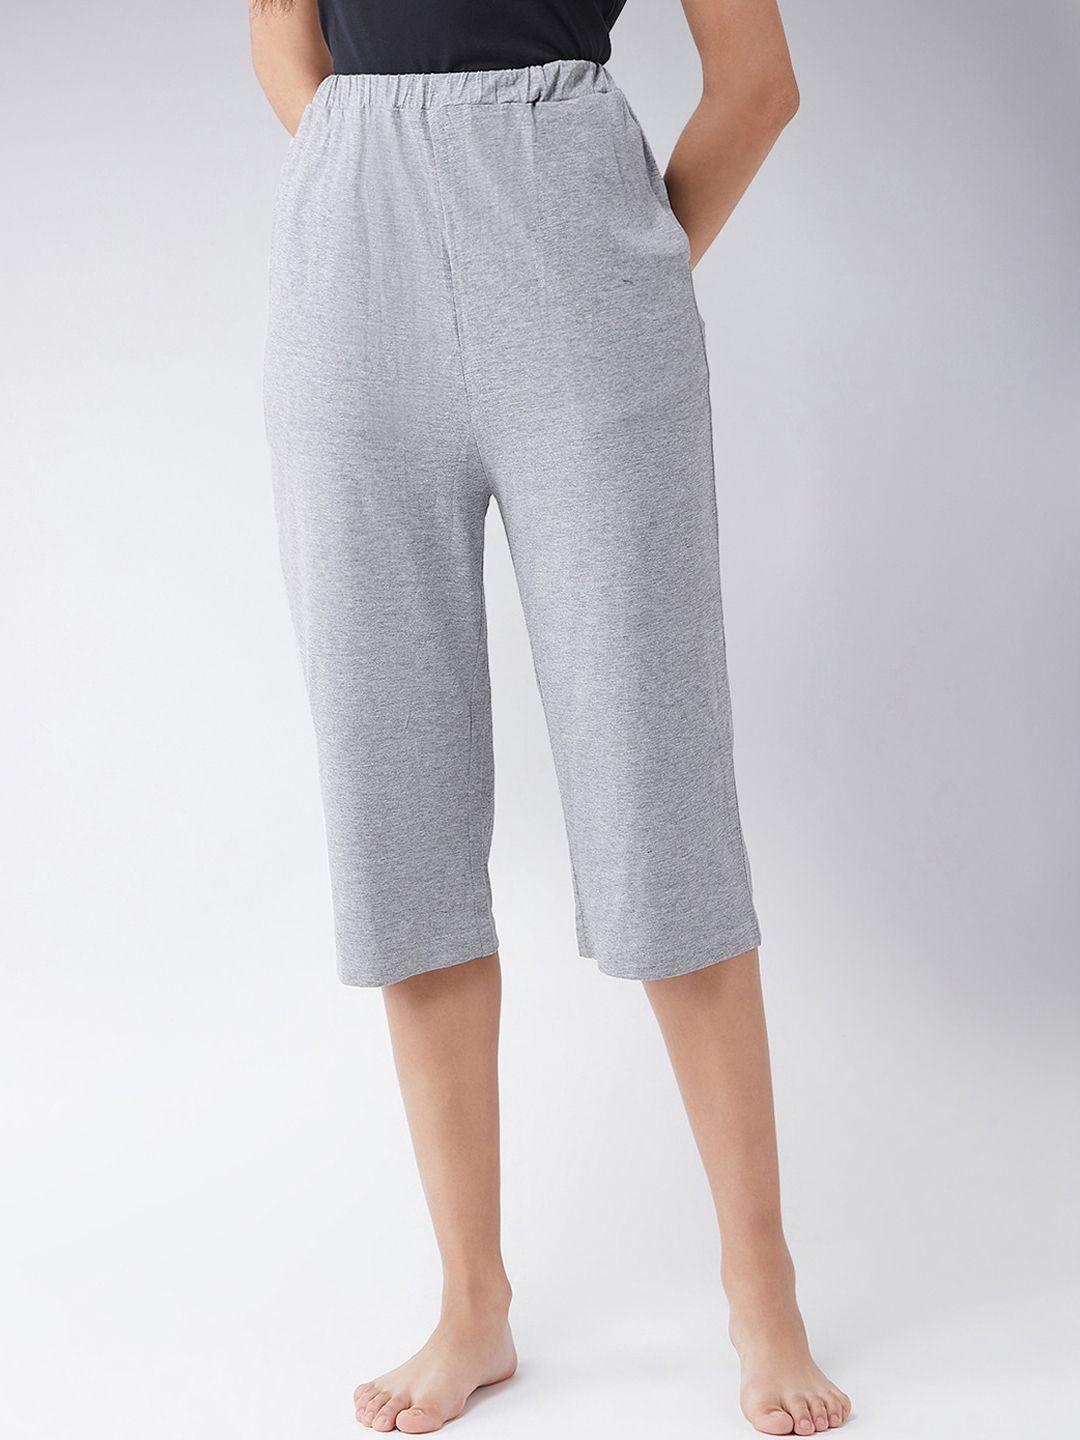 miss chase women grey solid regular fit capris